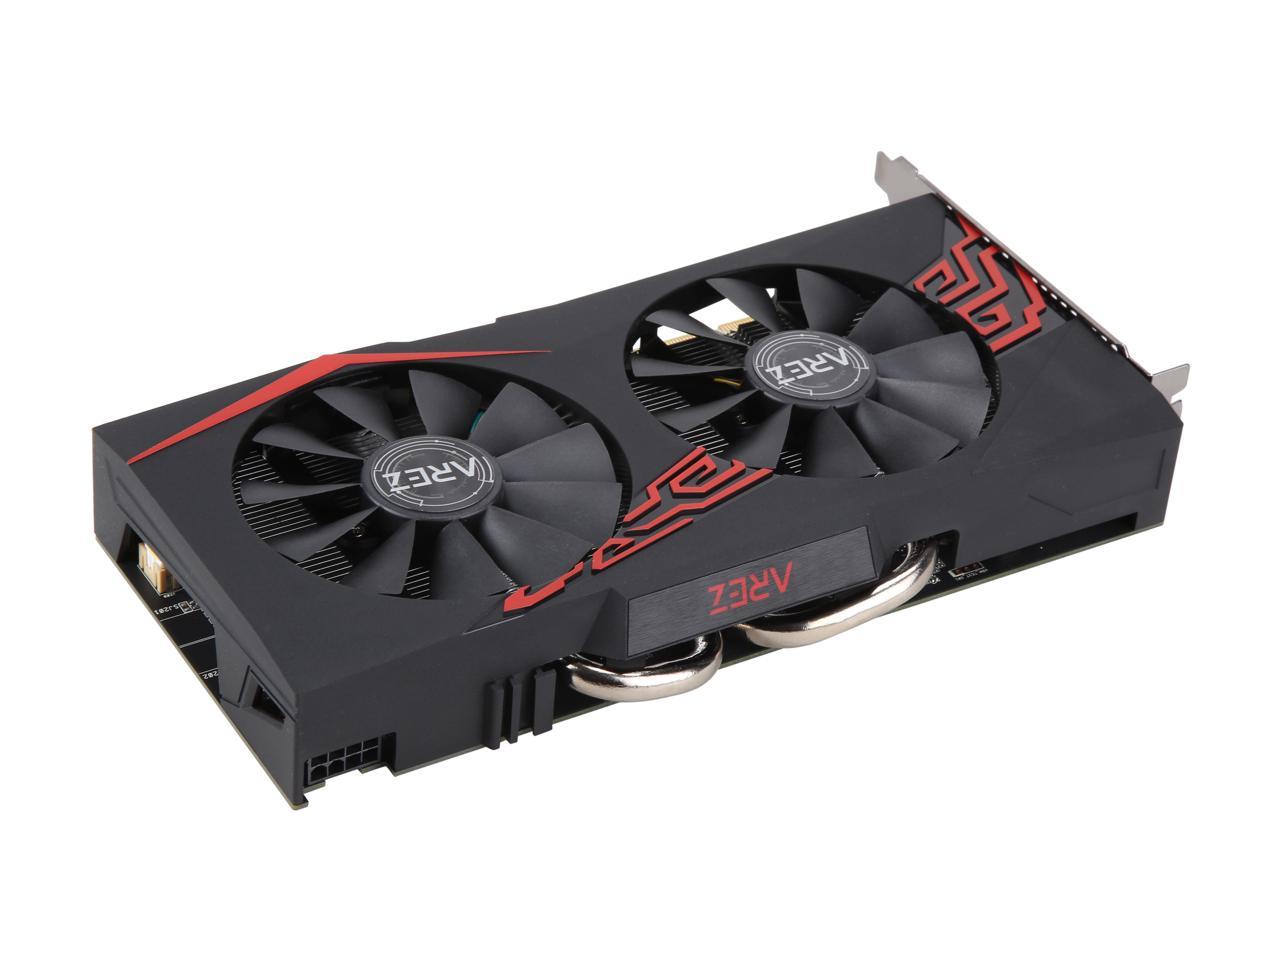 Hula hoop Protestant lever Open Box: ASUS AREZ Expedition Radeon RX 570 Video Card AREZ-EX-RX570-O8G -  Newegg.com